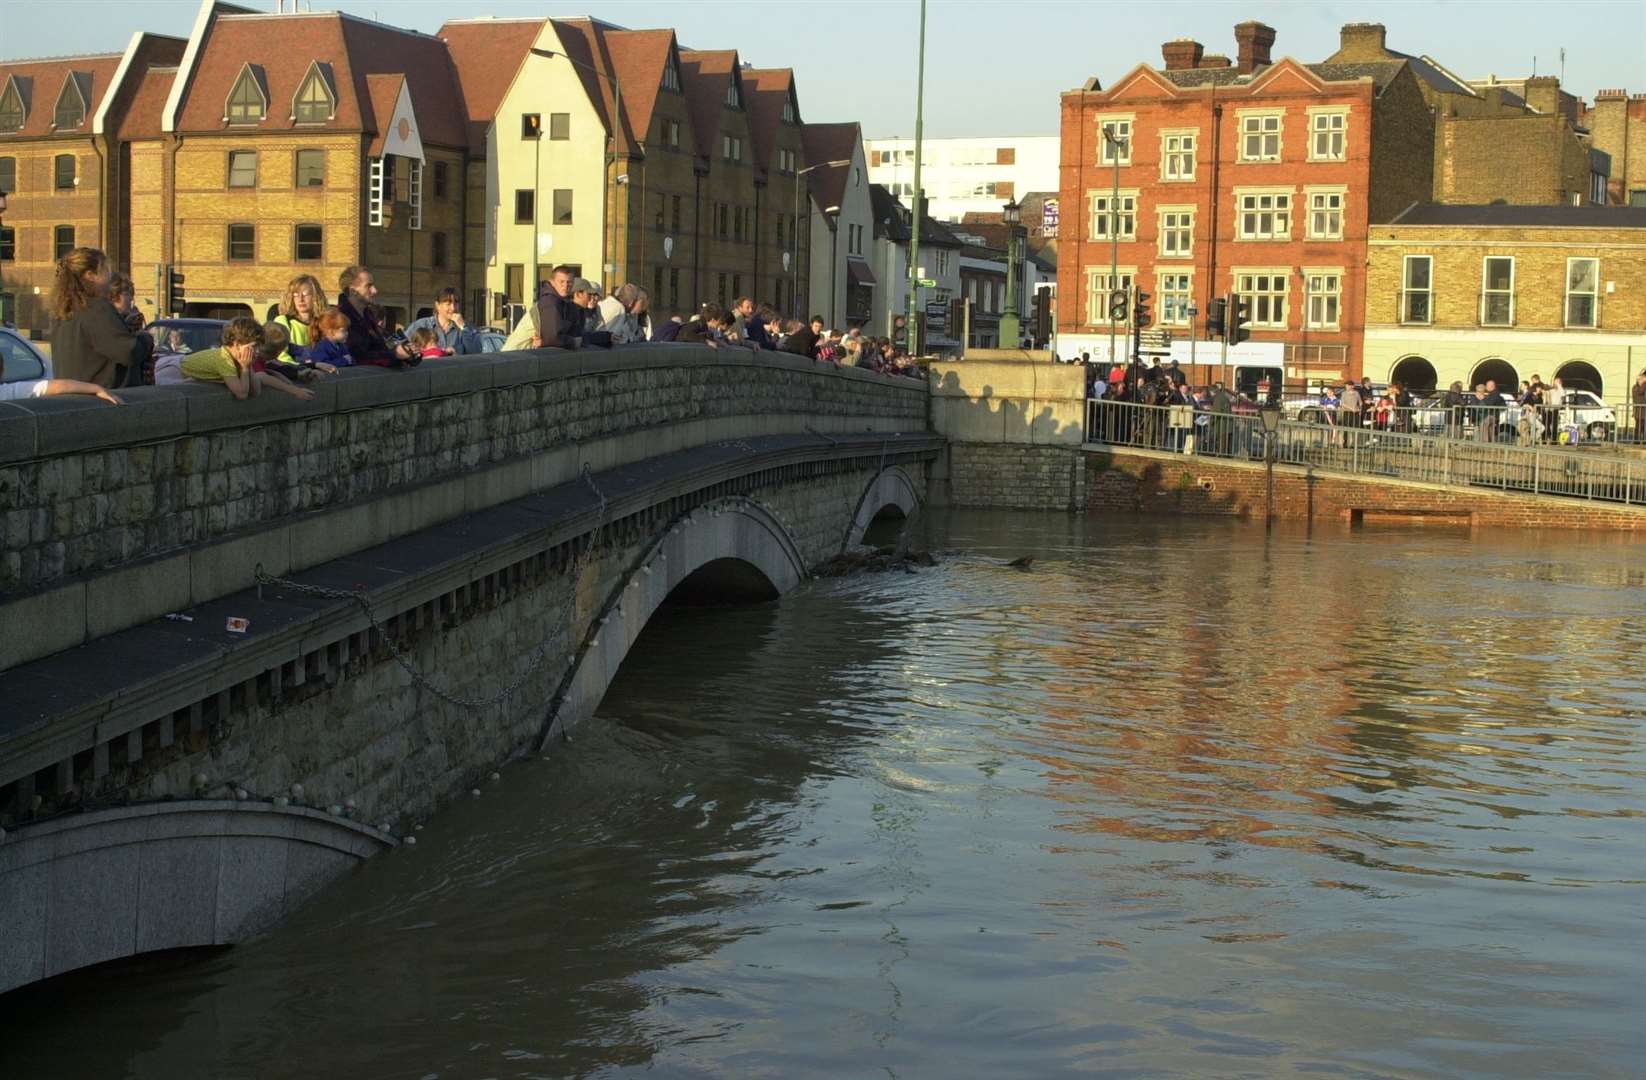 Crowds view the floods from Maidstone Bridge where the water is almost up with the top of the arches